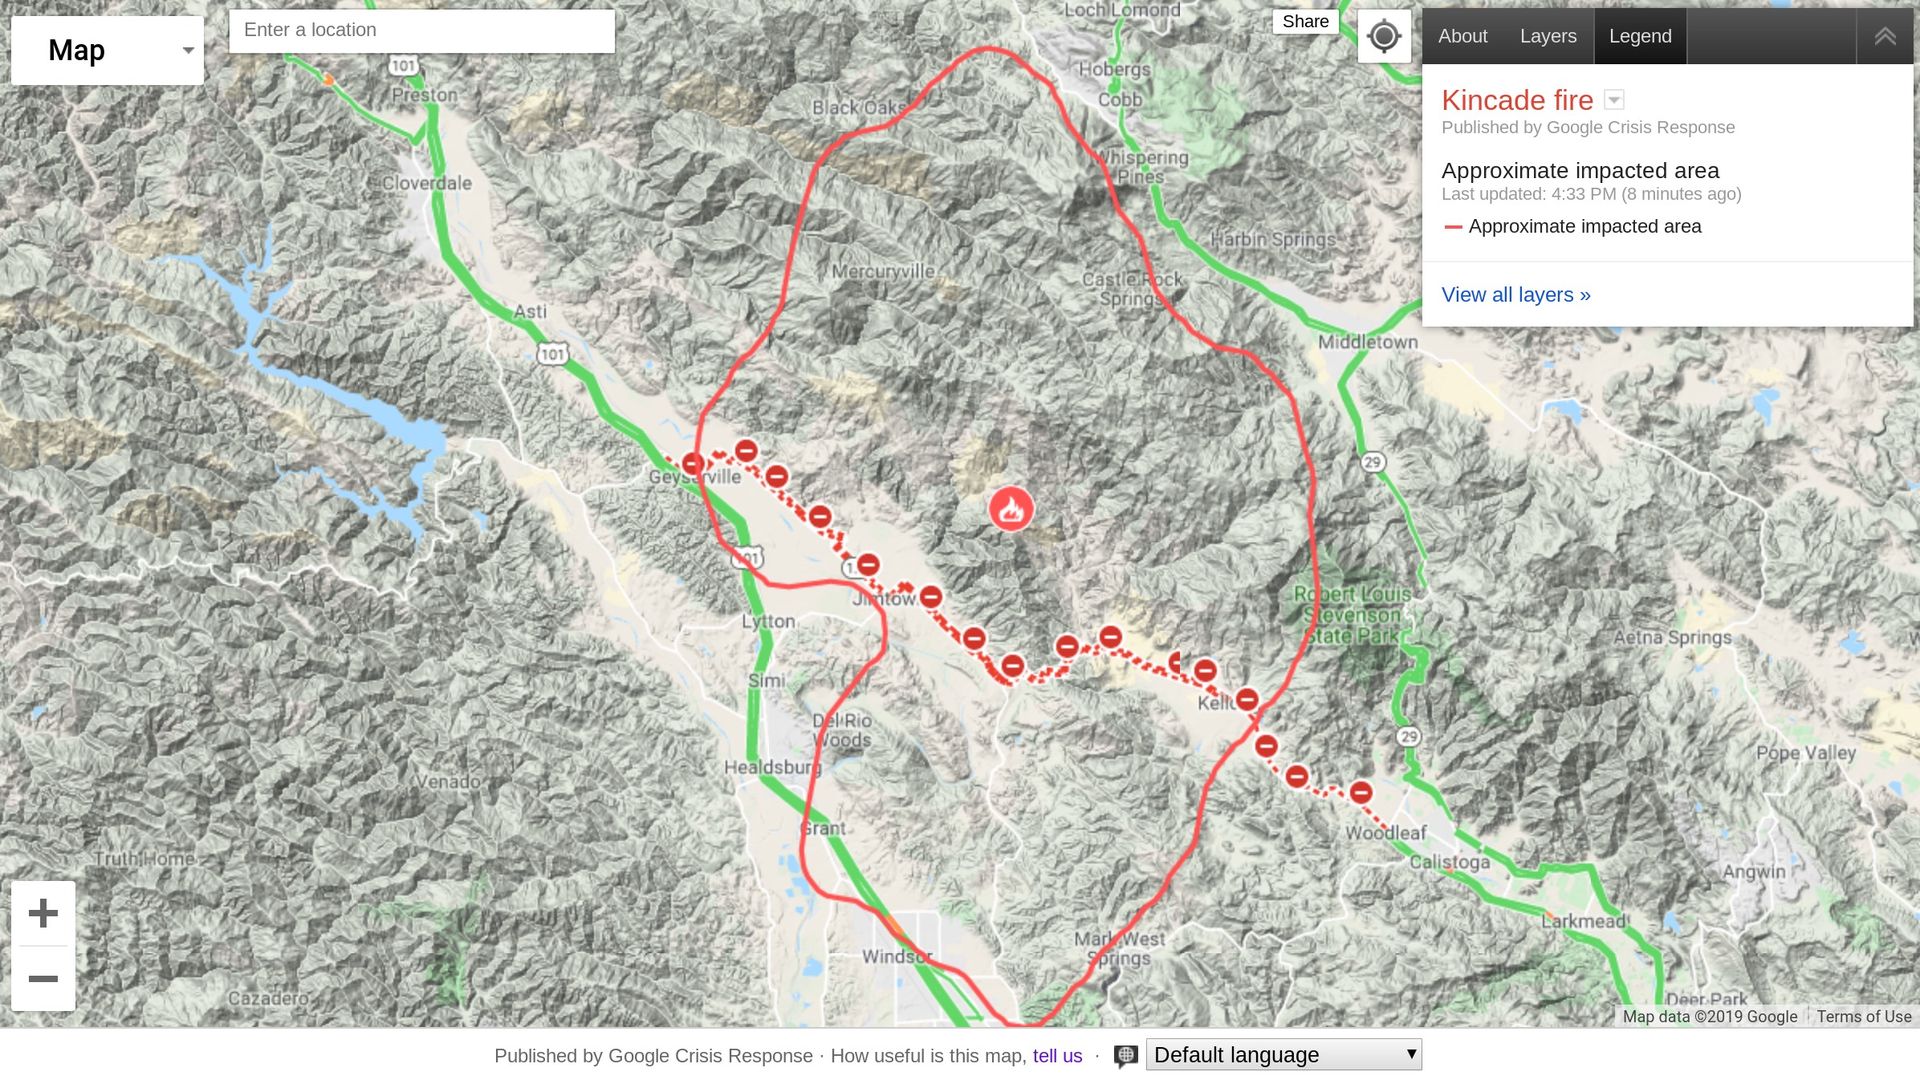 Google uses satellite imagery to update the boundaries of the October 2019 Kincaid Fire